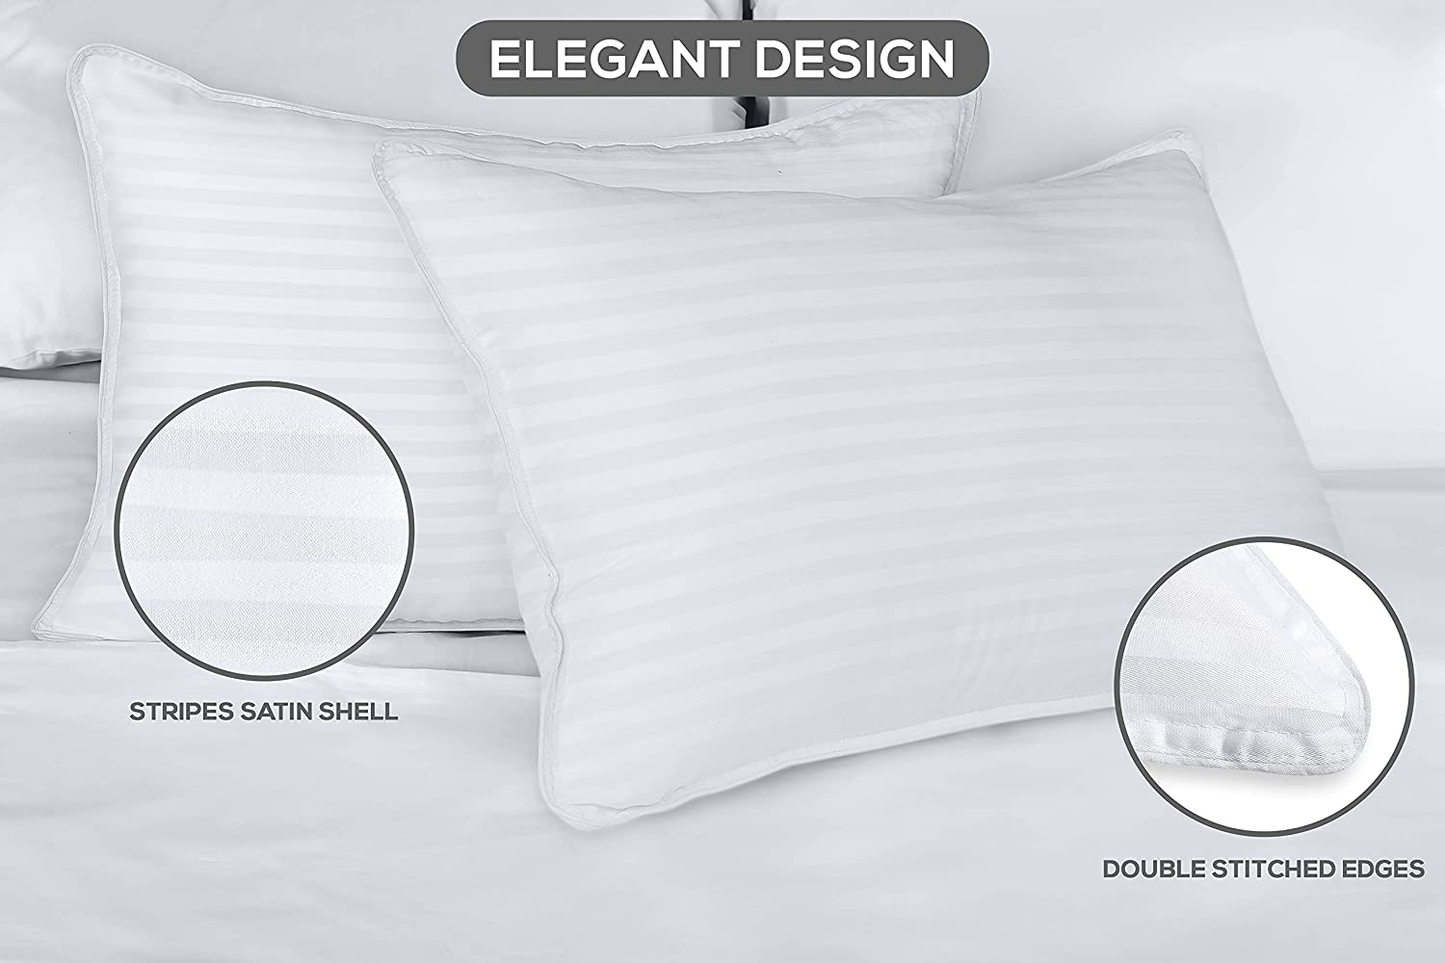  Bed Pillows for Sleeping Standard Size, Set of 2, Cooling Hotel Quality, for Back, Stomach or Side Sleepers